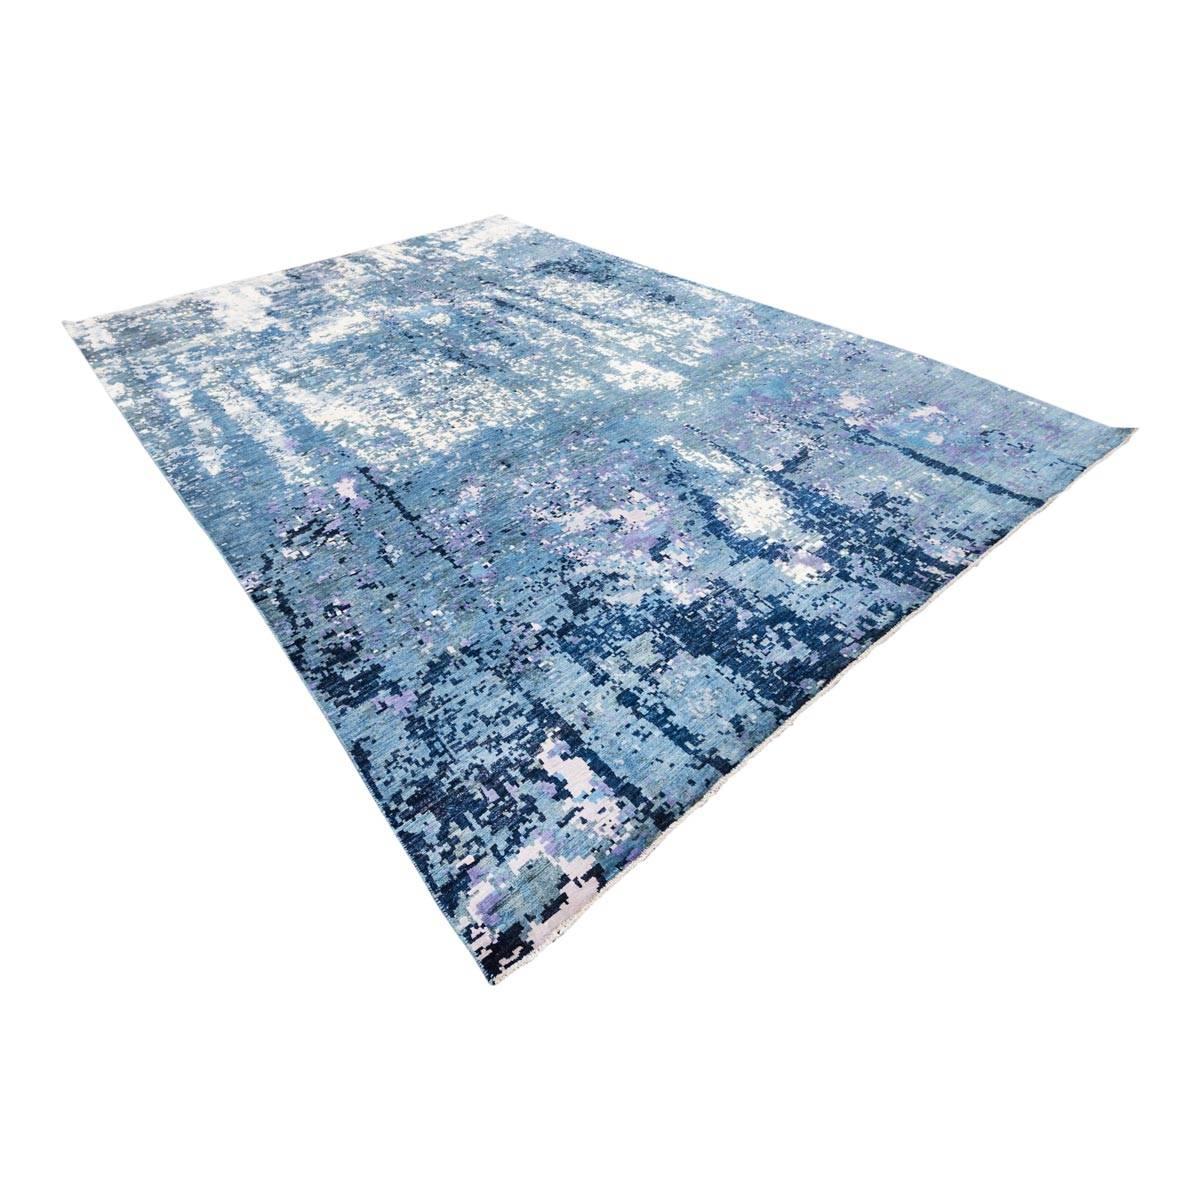 Pakistani Handmade Contemporary Rug in Silk and Wool Blue Shades